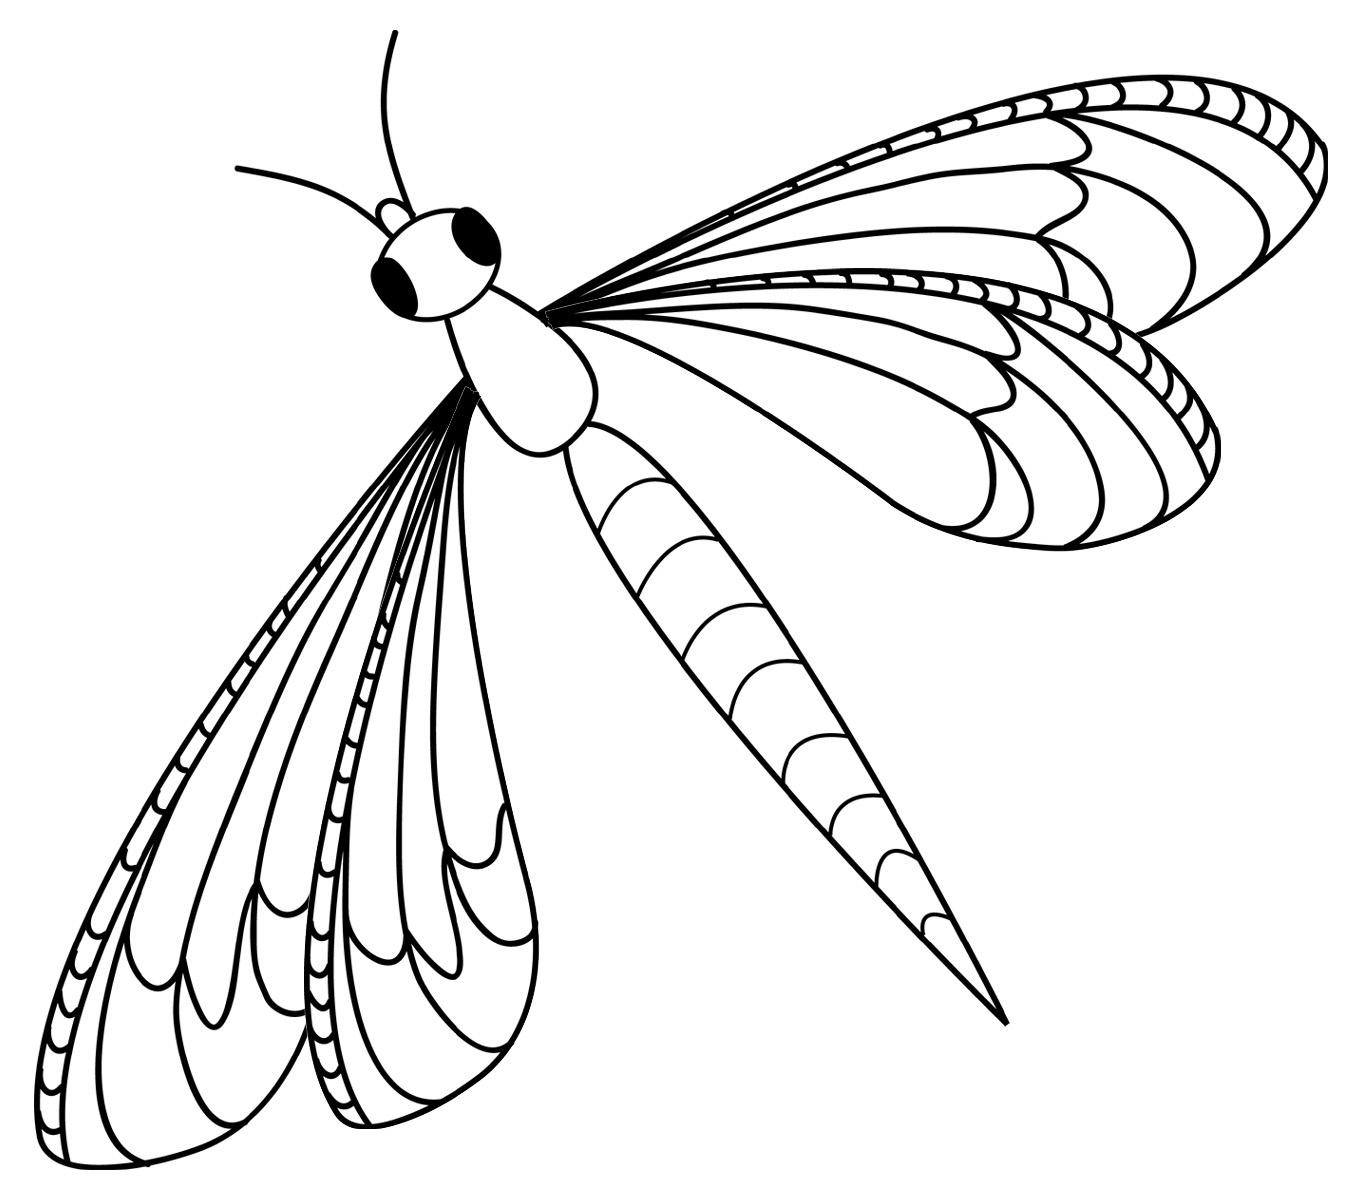 Free Printable Dragonfly Coloring Pages For Kids - Free Printable Pictures Of Dragonflies